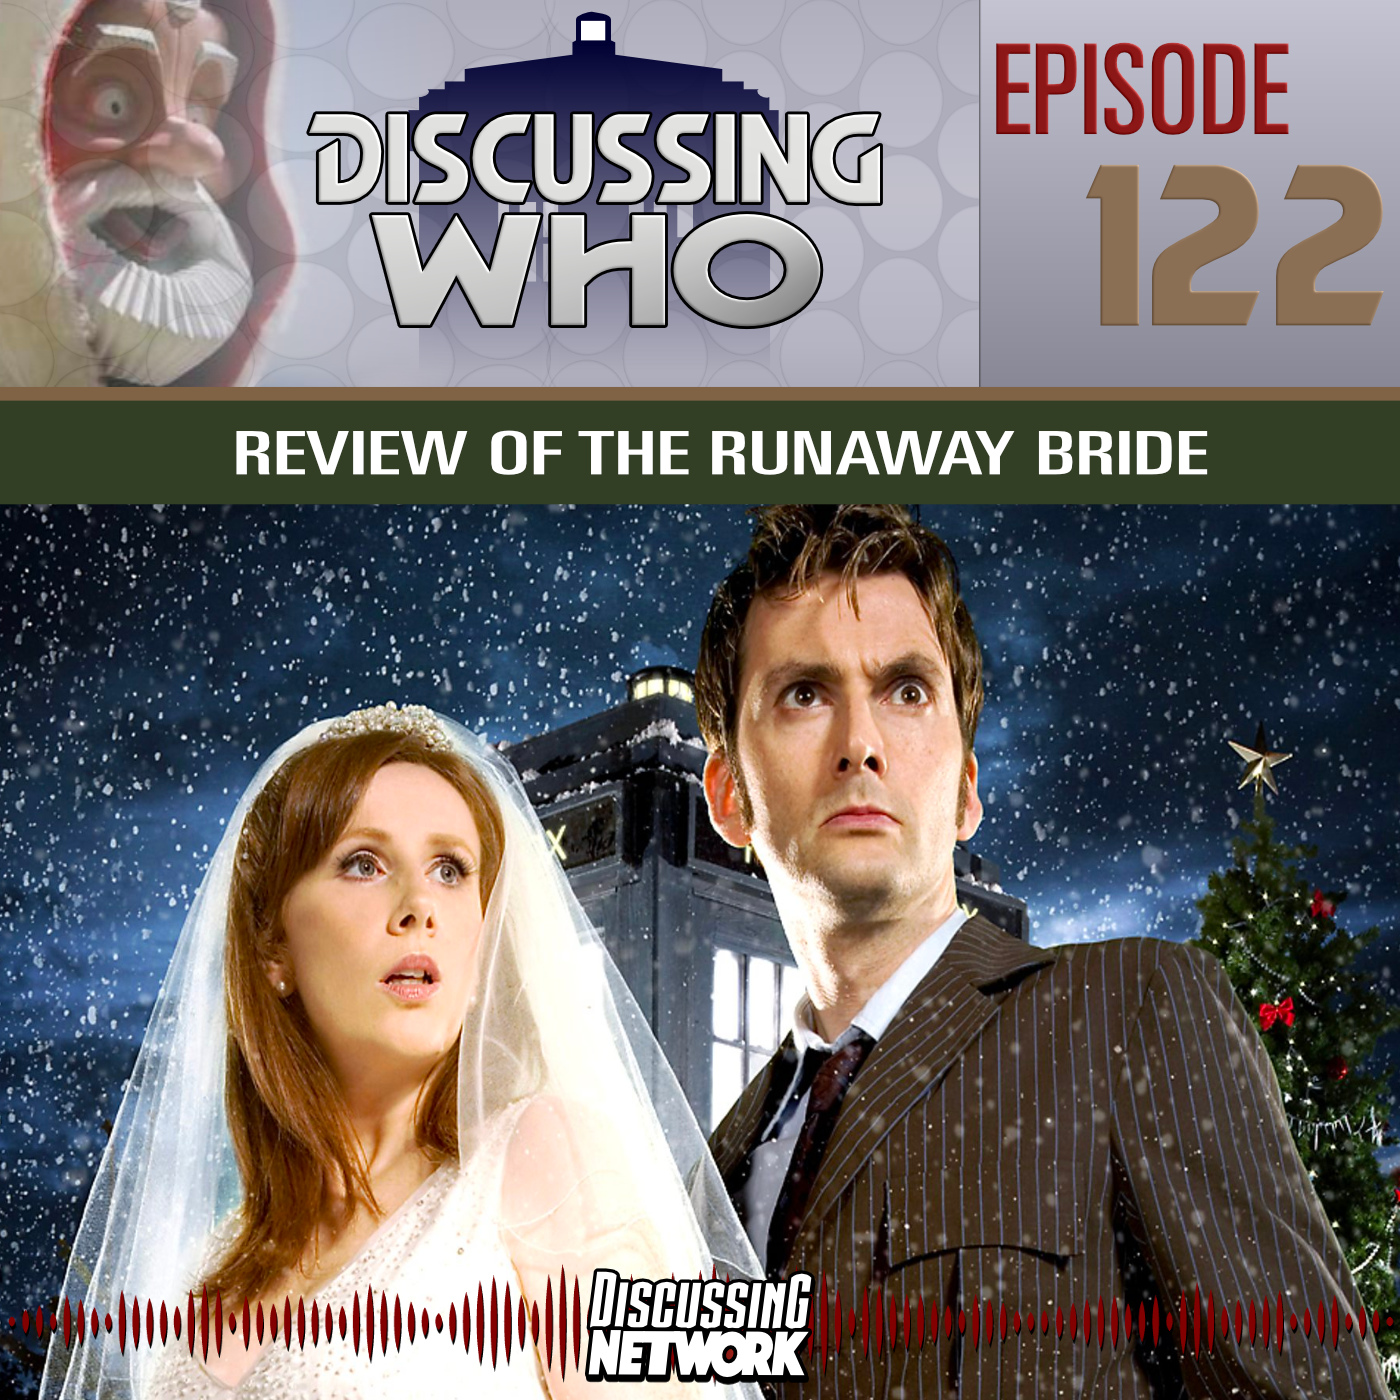 Review of the Runaway Bride, Discussing Who Episode 122